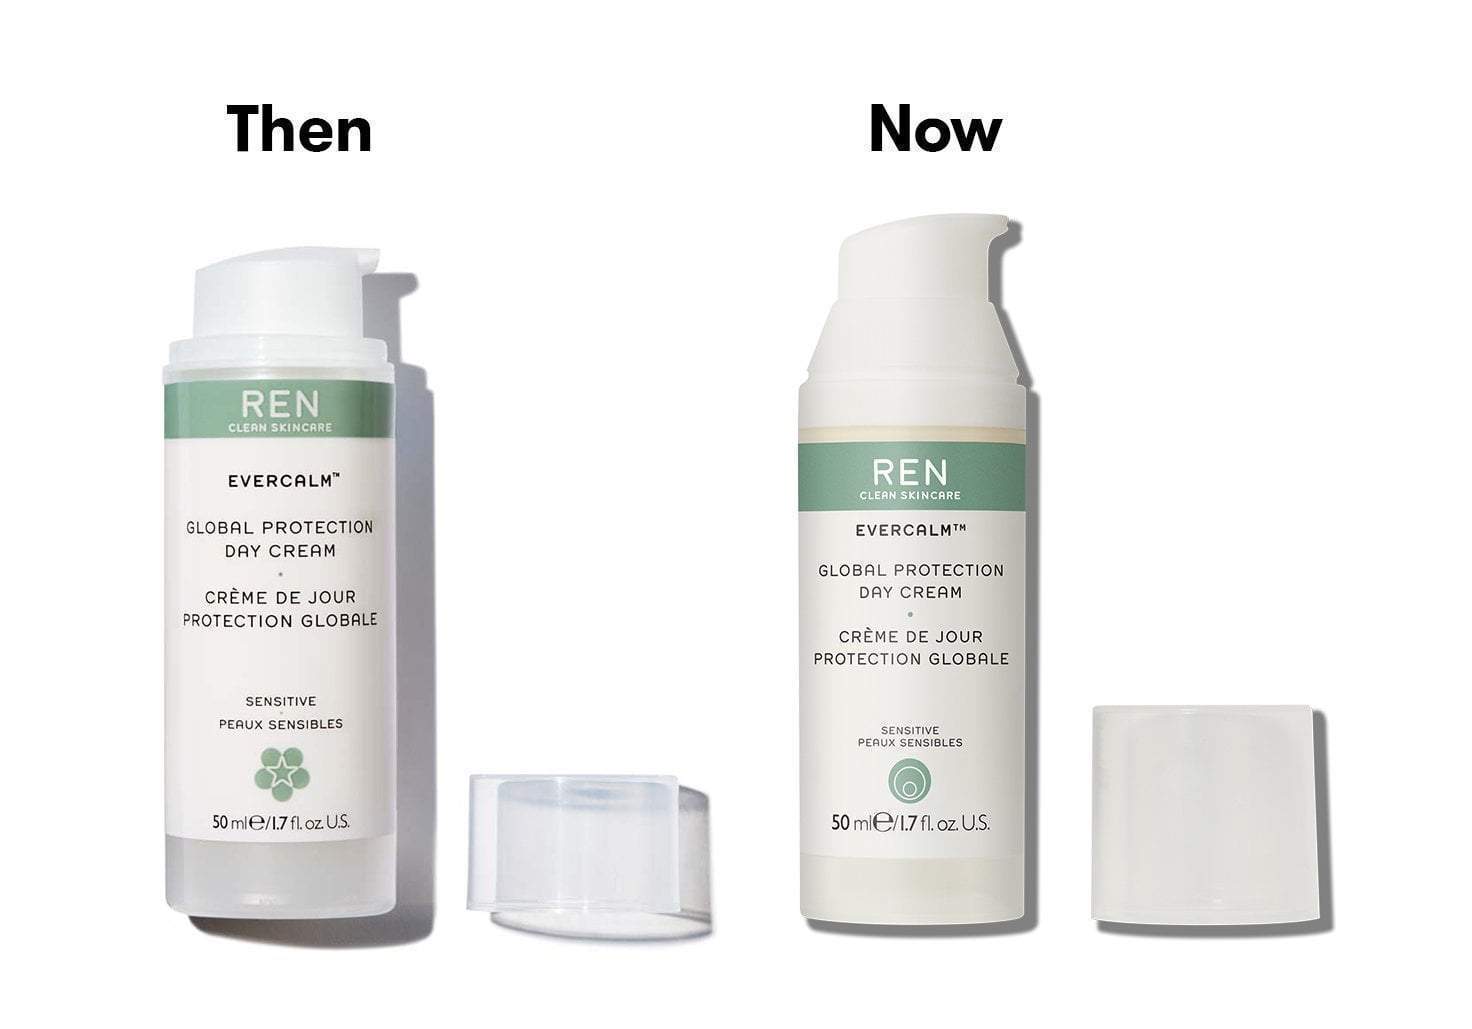 Reducing waste: our formula repack.